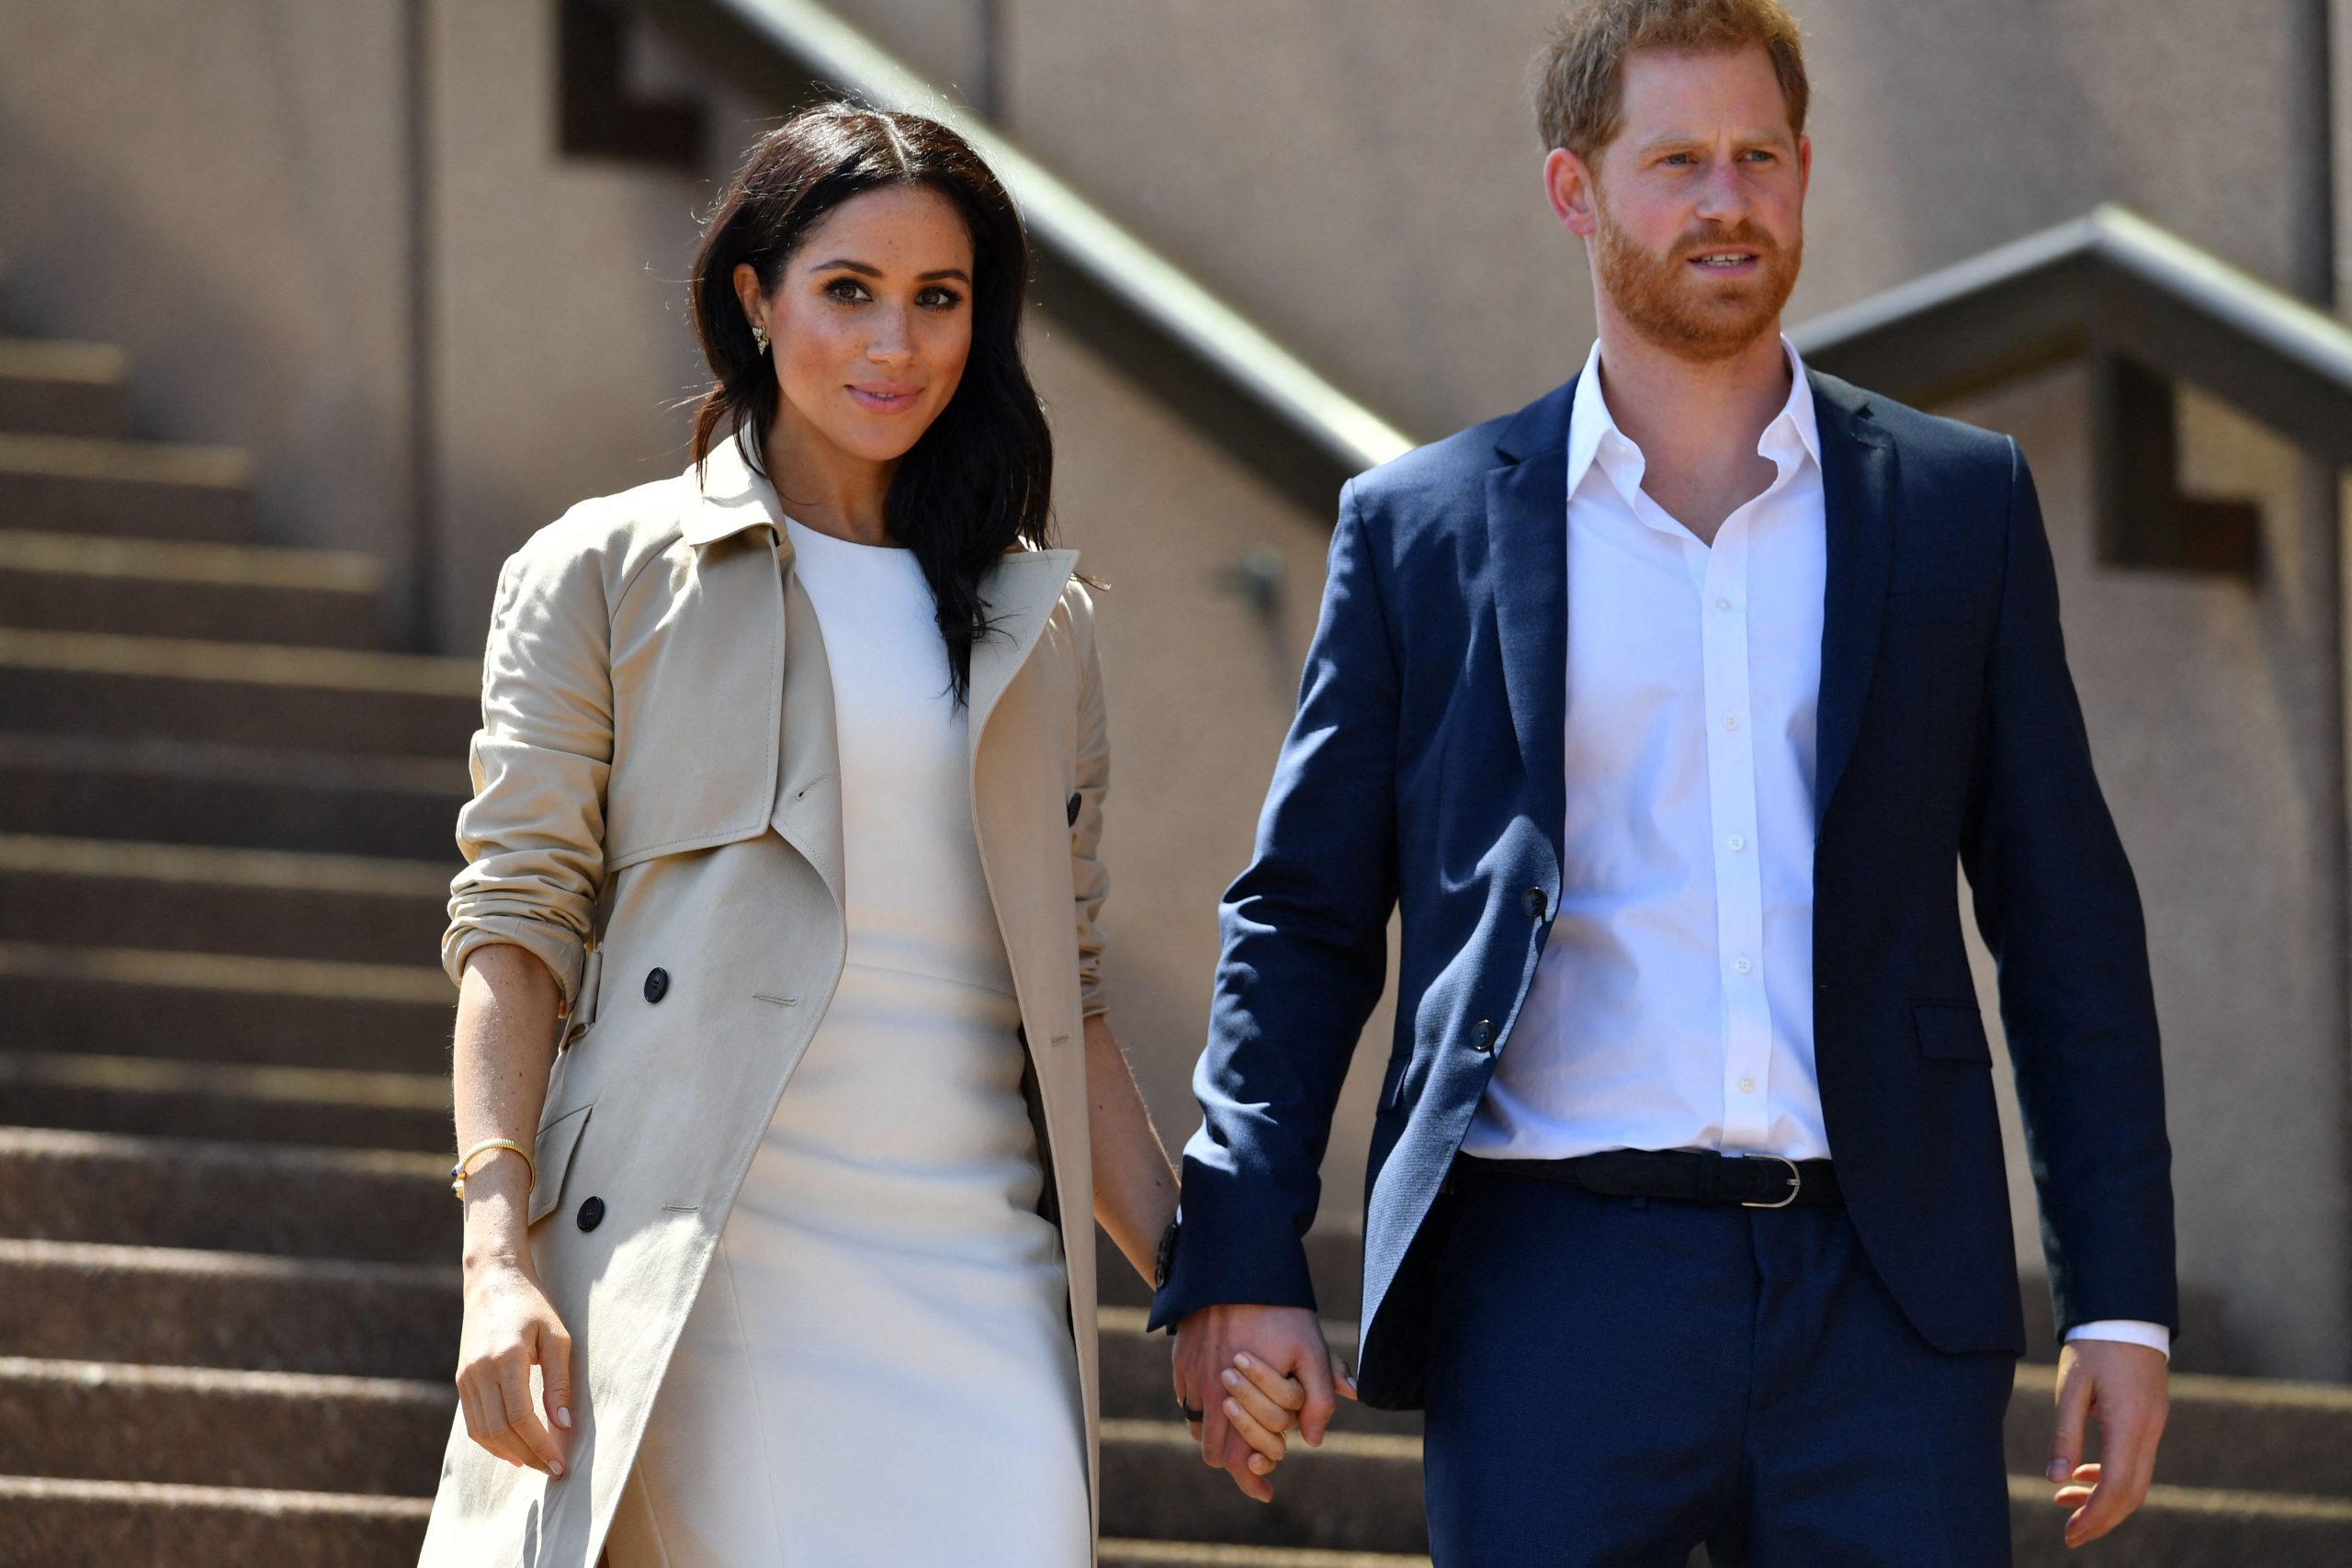 Prince Harry and Meghan Markle expecting their second child: Spokesperson